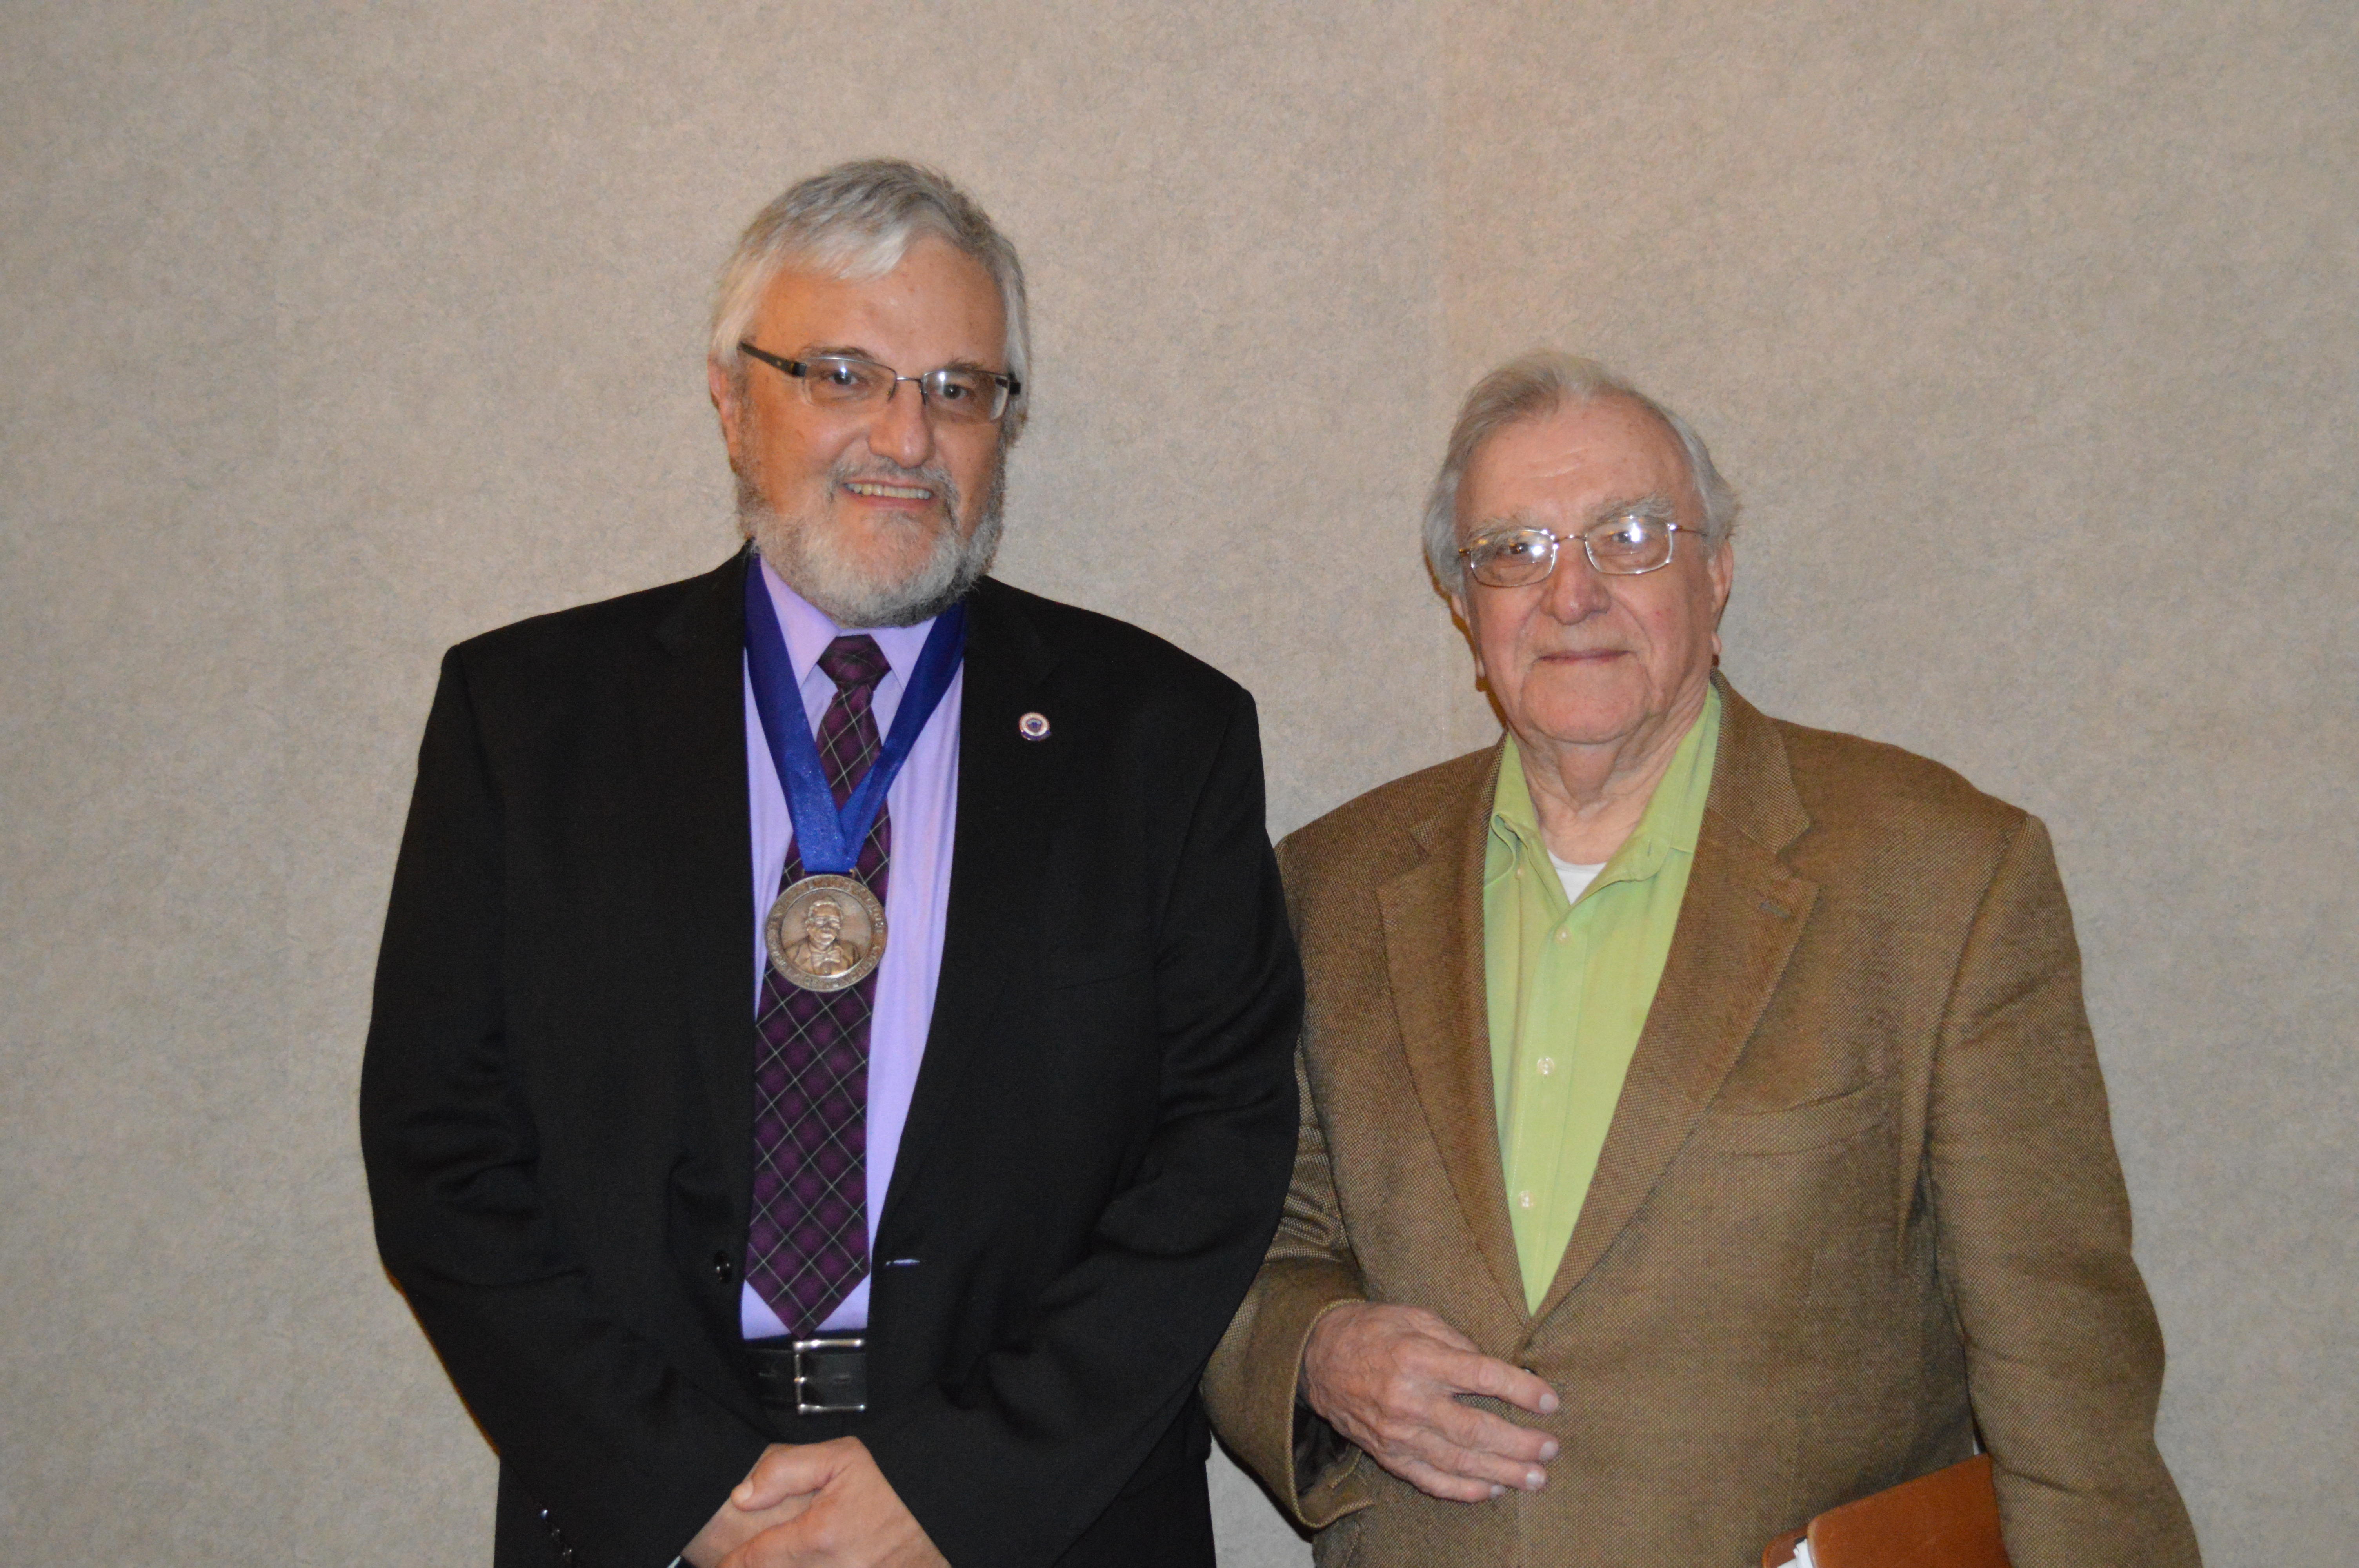 John Doull Award to Dr. Riviere